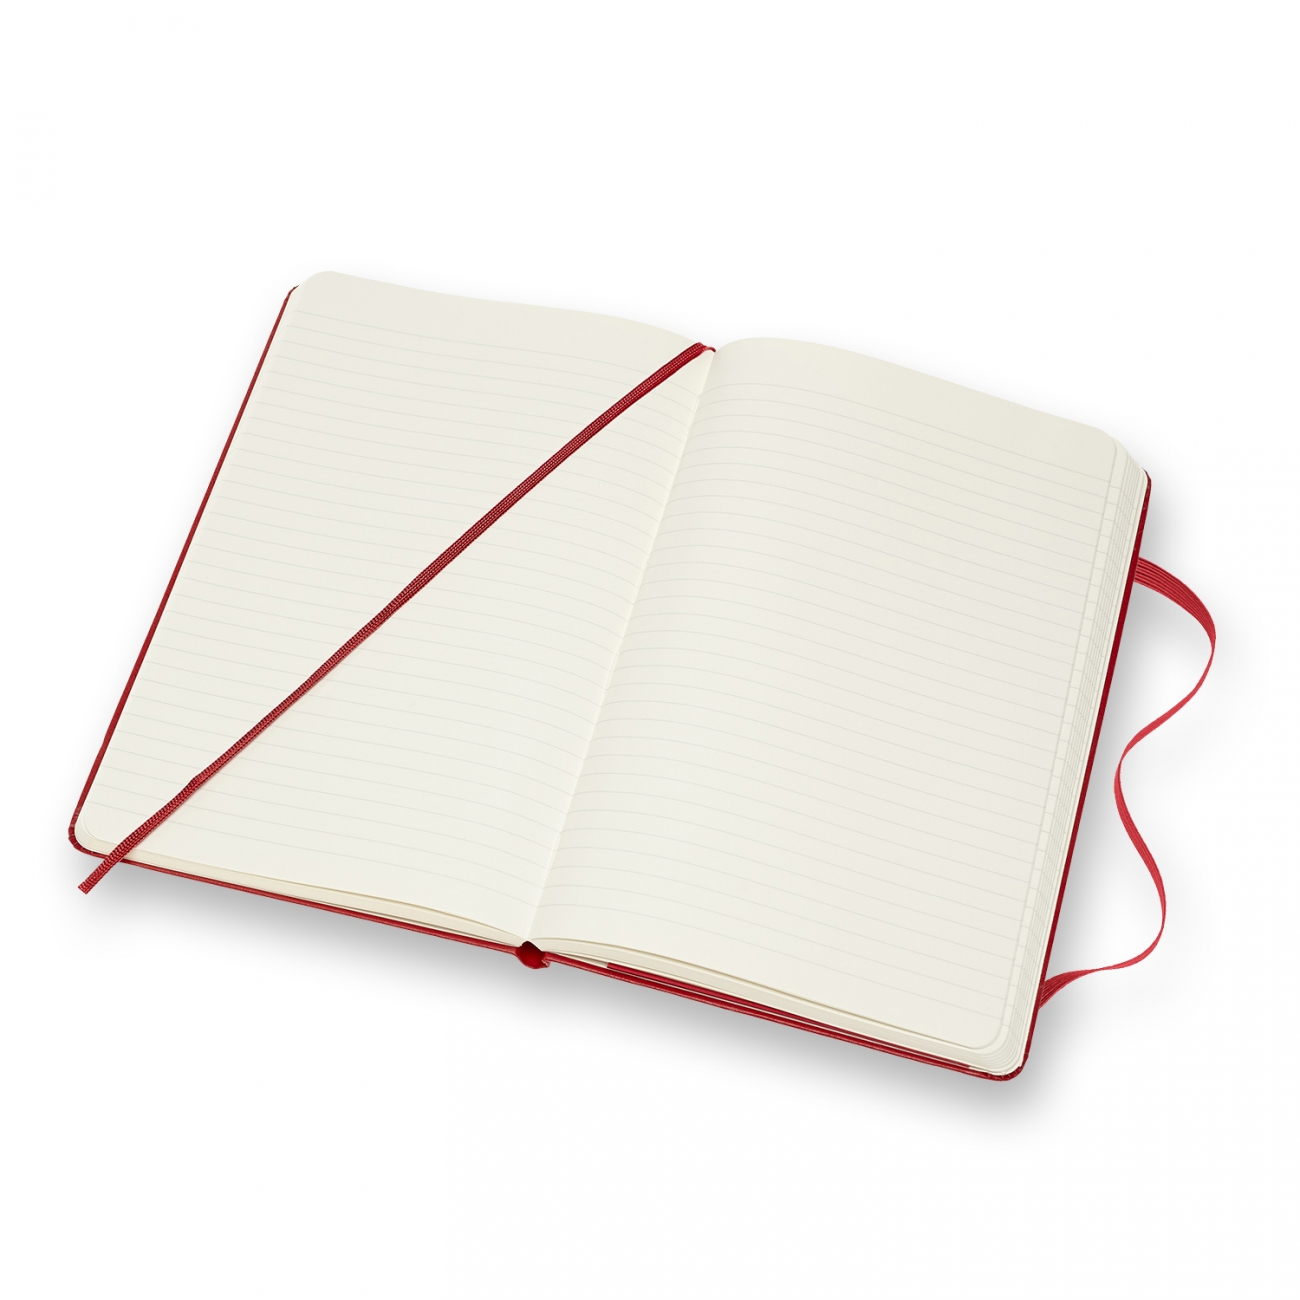 CLASSIC HARD COVER NOTEBOOK - RULED - LARGE - SCARLET RED